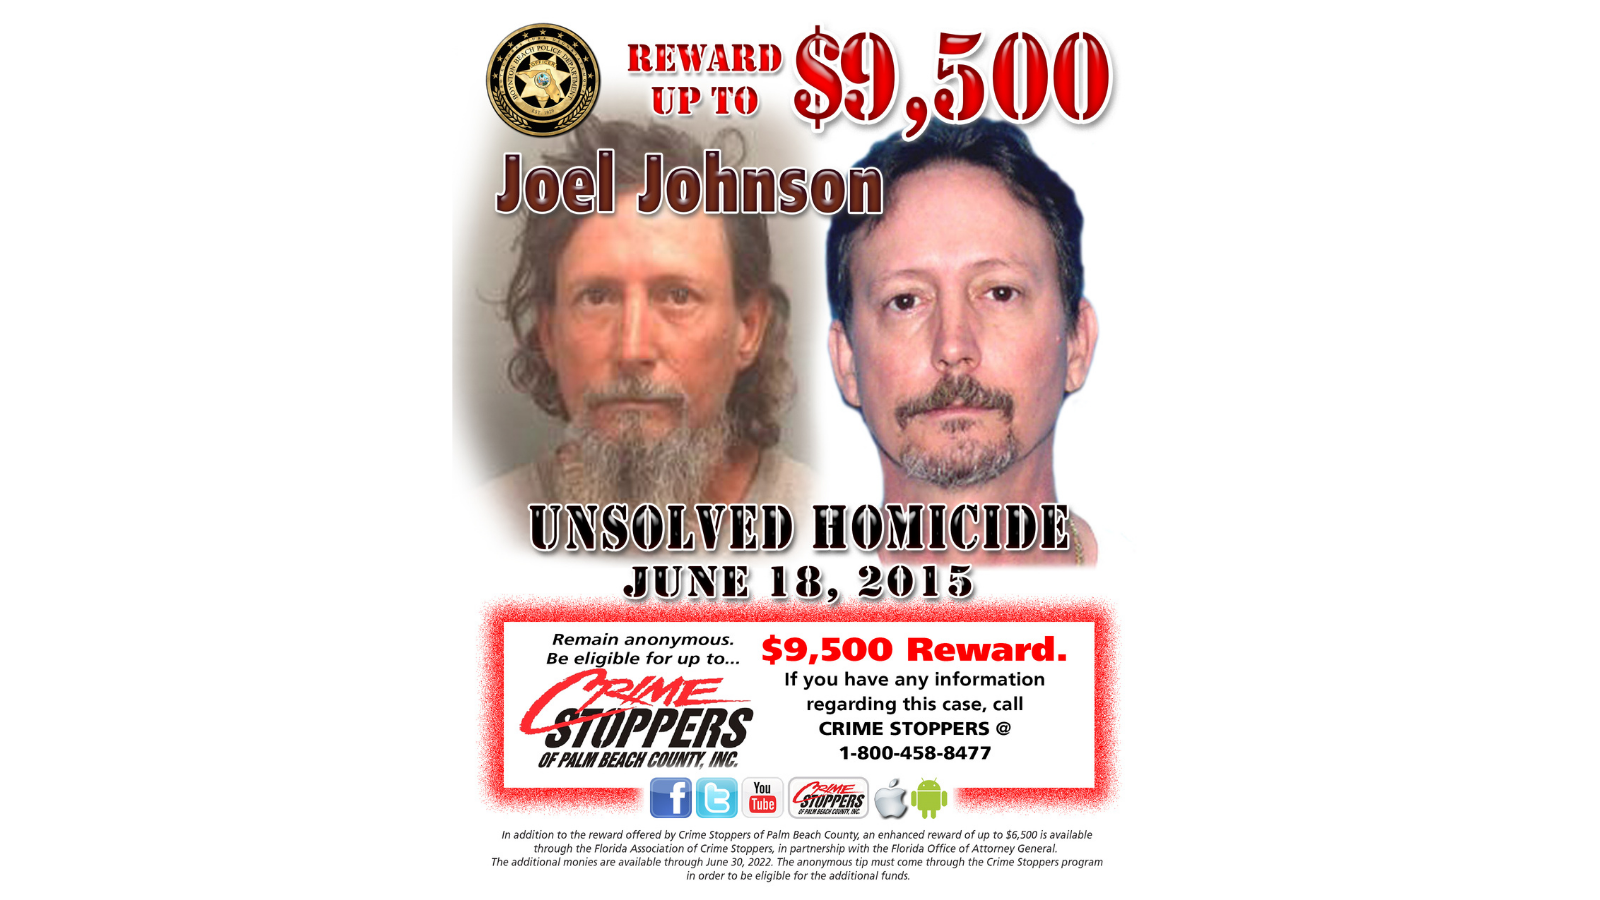 Two photos of Joel Johnson with phone number to crime stoppers of palm beach county and announcement of $9,500 reward for information about his murder on June 18, 2015.